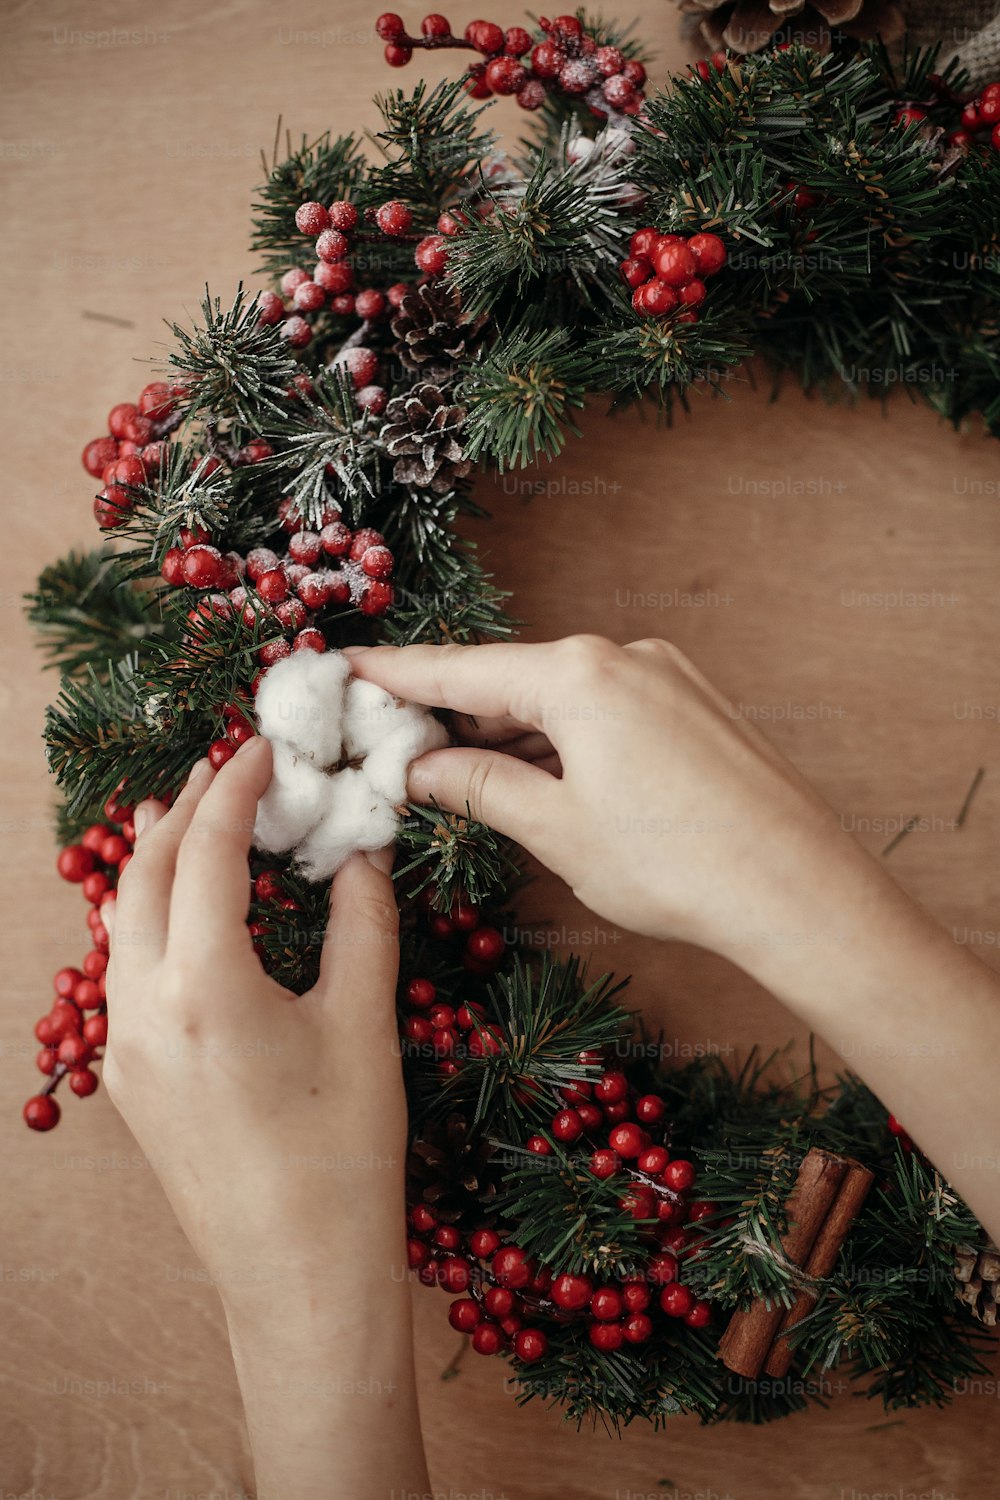 Hands making rustic christmas wreath, holding cotton at fir branches, red berries , pine cones on rustic wooden background. Atmospheric moody image at winter holiday workshop